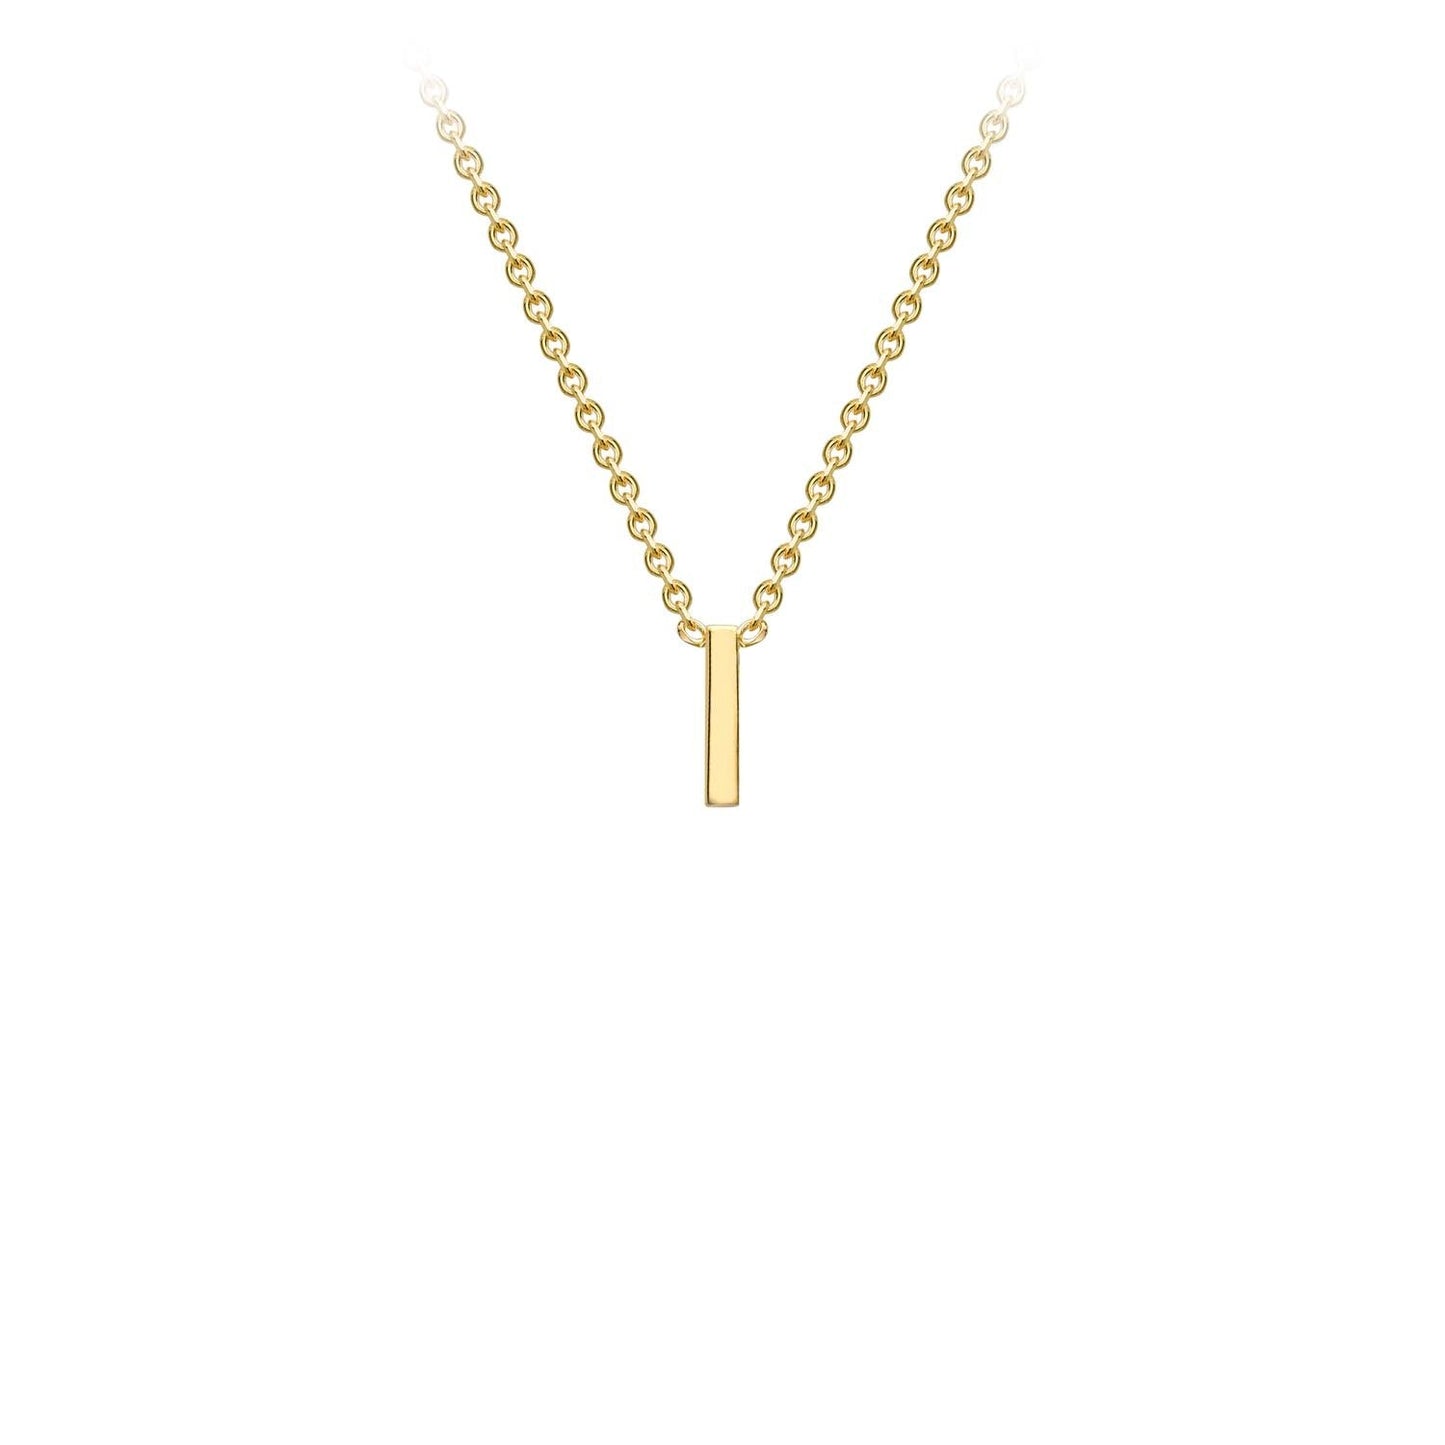 9K Yellow Gold 'I' Initial Adjustable Letter Necklace 38/43cm